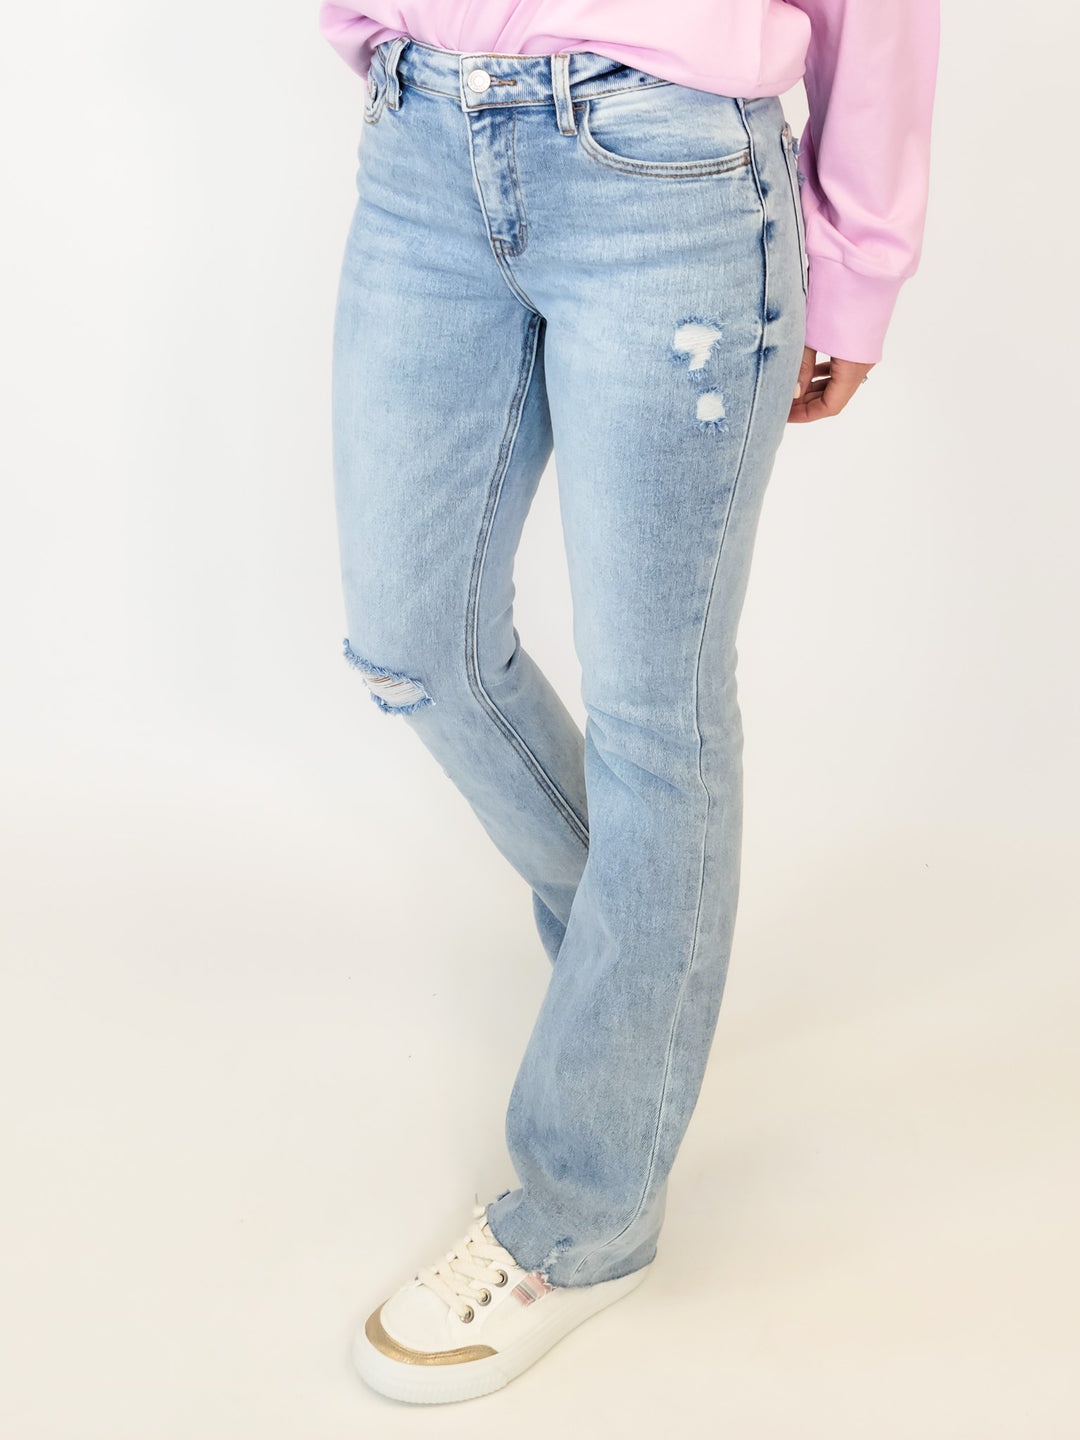 LOVERVET HIGH RISE RELAXED BOOTCUT W/DISTRESSING JEAN - LIGHT WASH